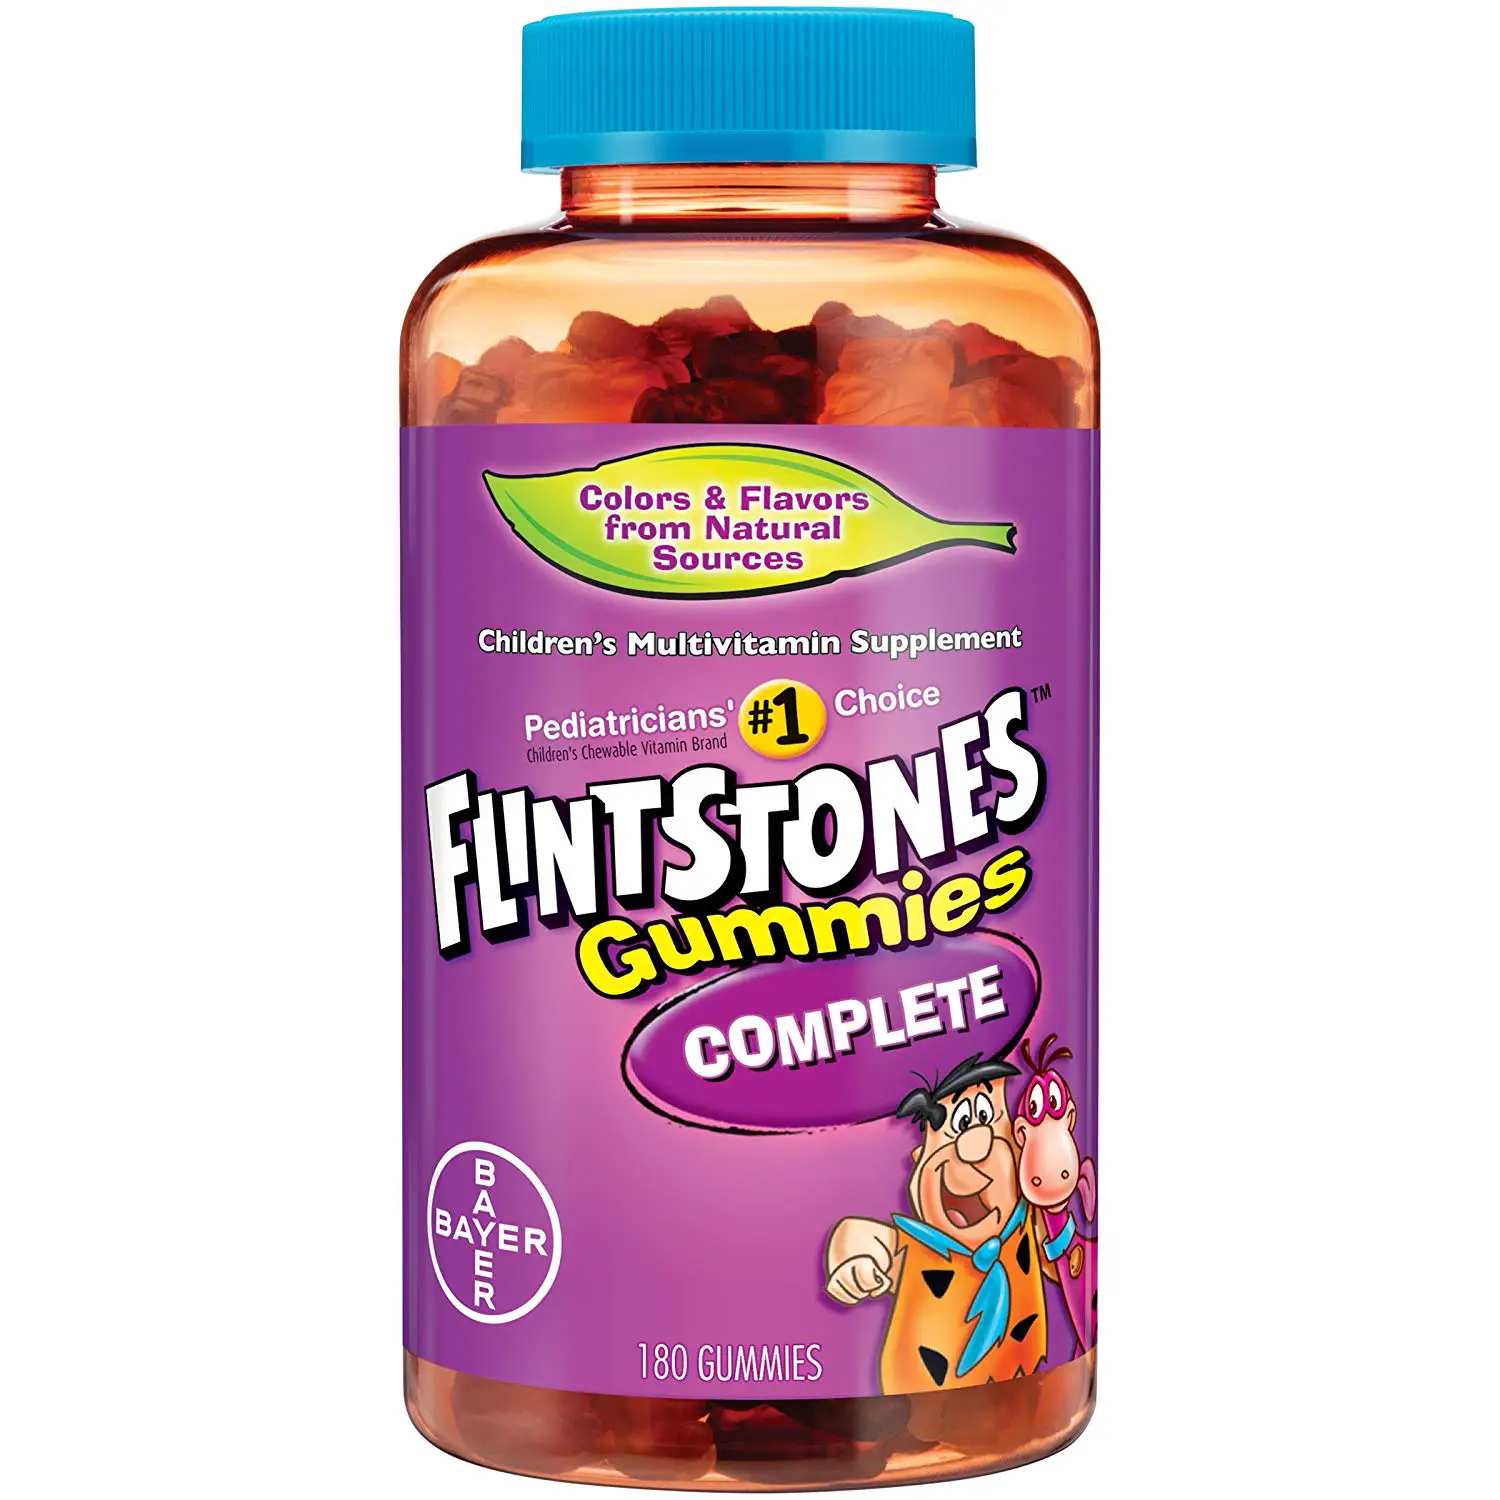 Top 5 Best Gummy Vitamins for Kids in 2020 Review